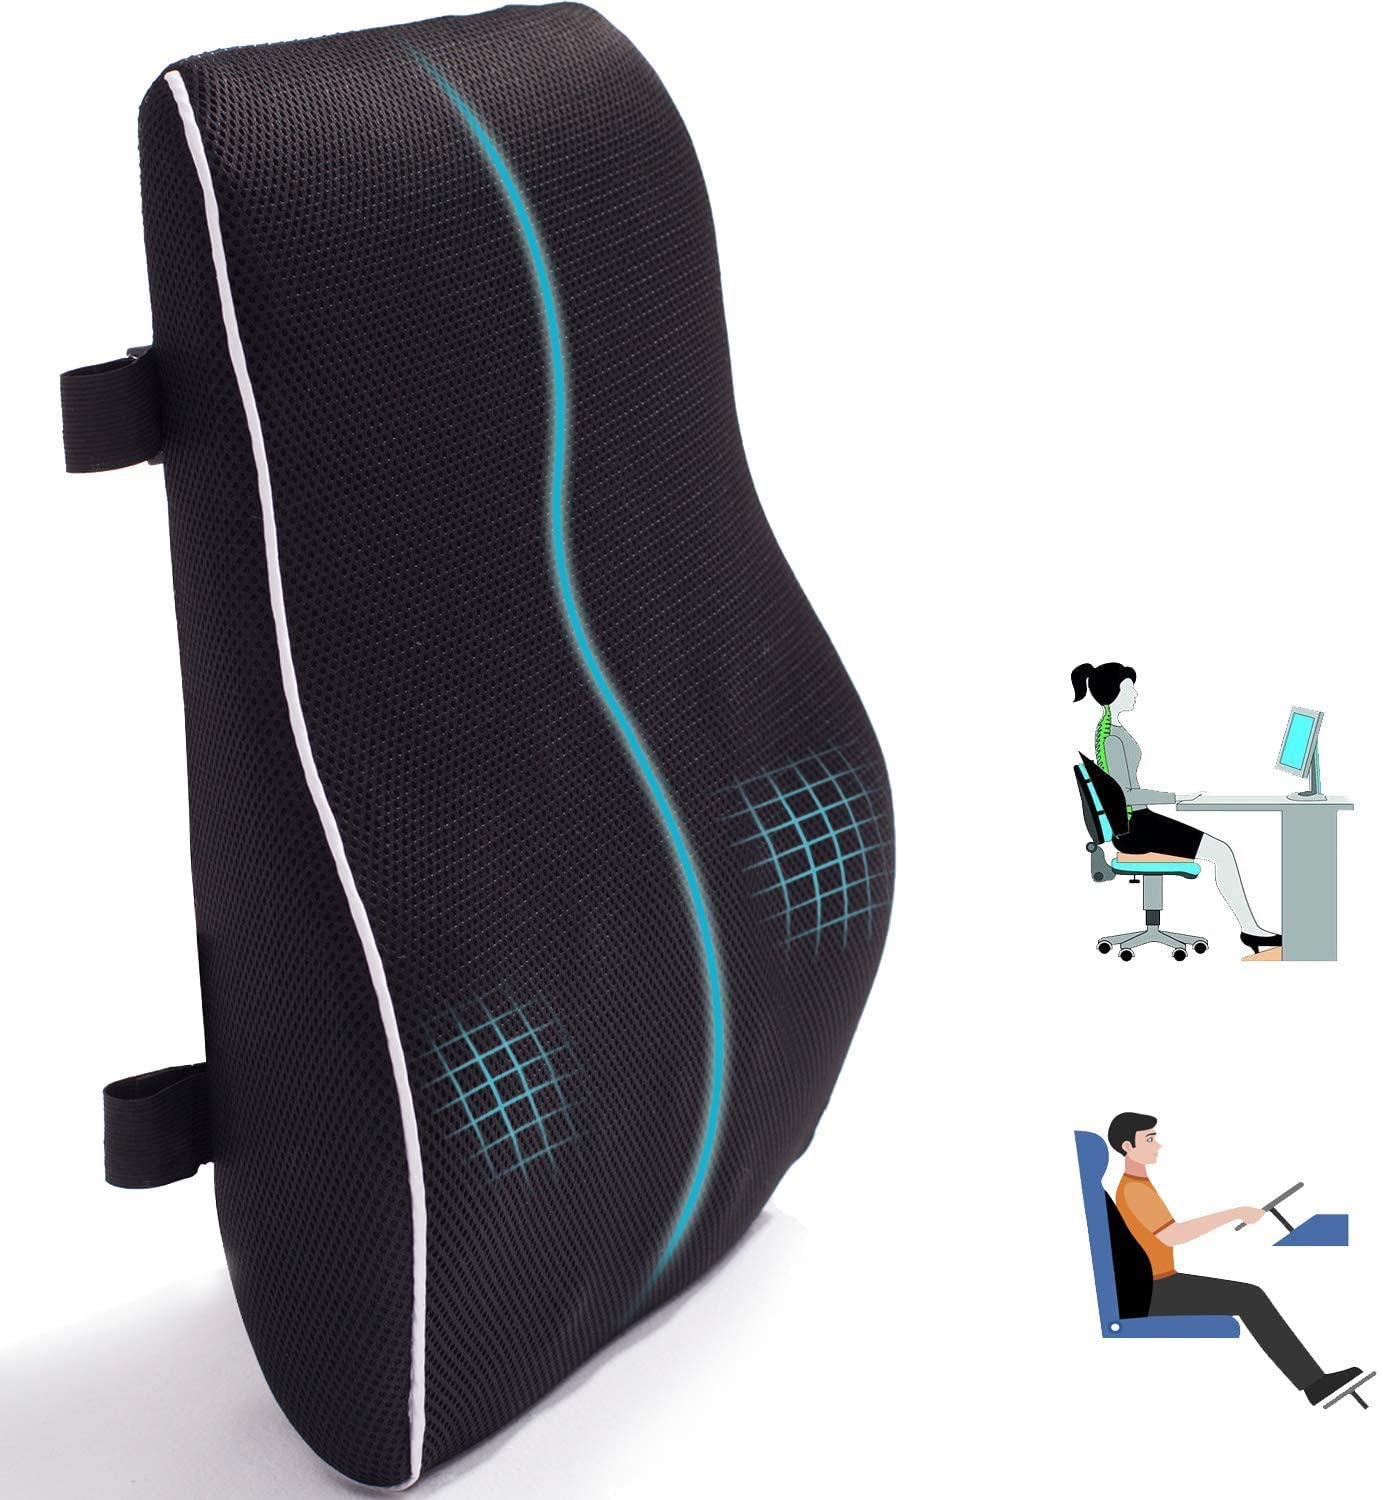  Cushion Lab Extra Dense Lumbar Pillow - Patented Ergonomic  Multi-Region Firm Back Support for Lower Back Pain Relief - Lumbar Support  Cushion w/Strap for Office Chair, Car, Sofa, Plane - Grey 